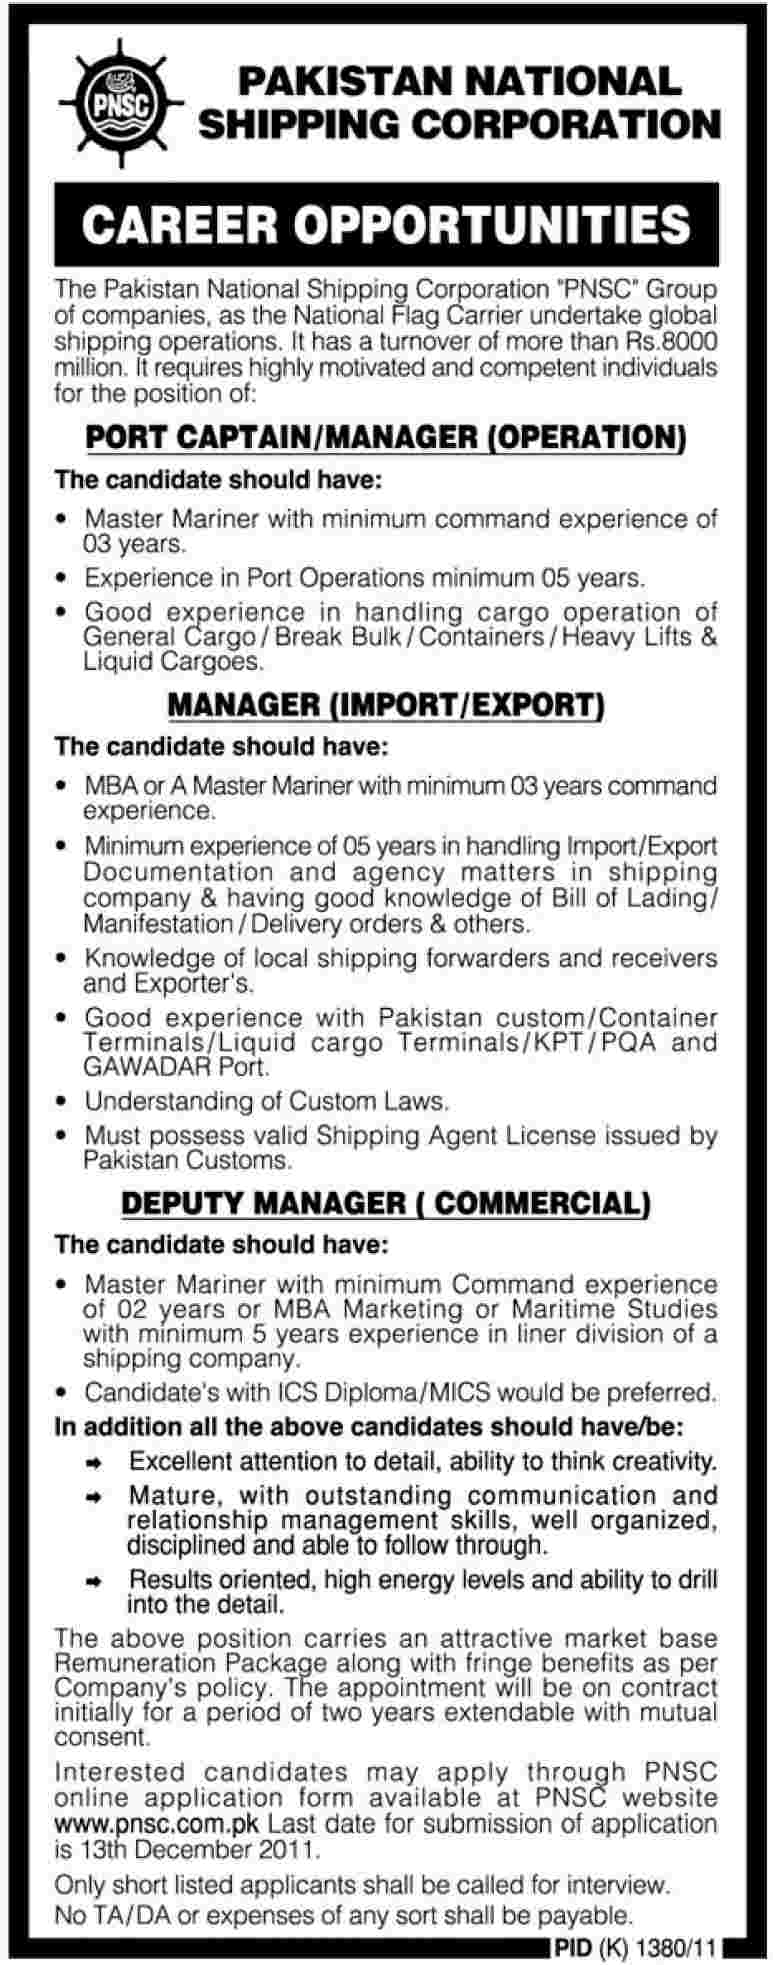 Pakistan National Shipping Corporation Jobs Opportunity